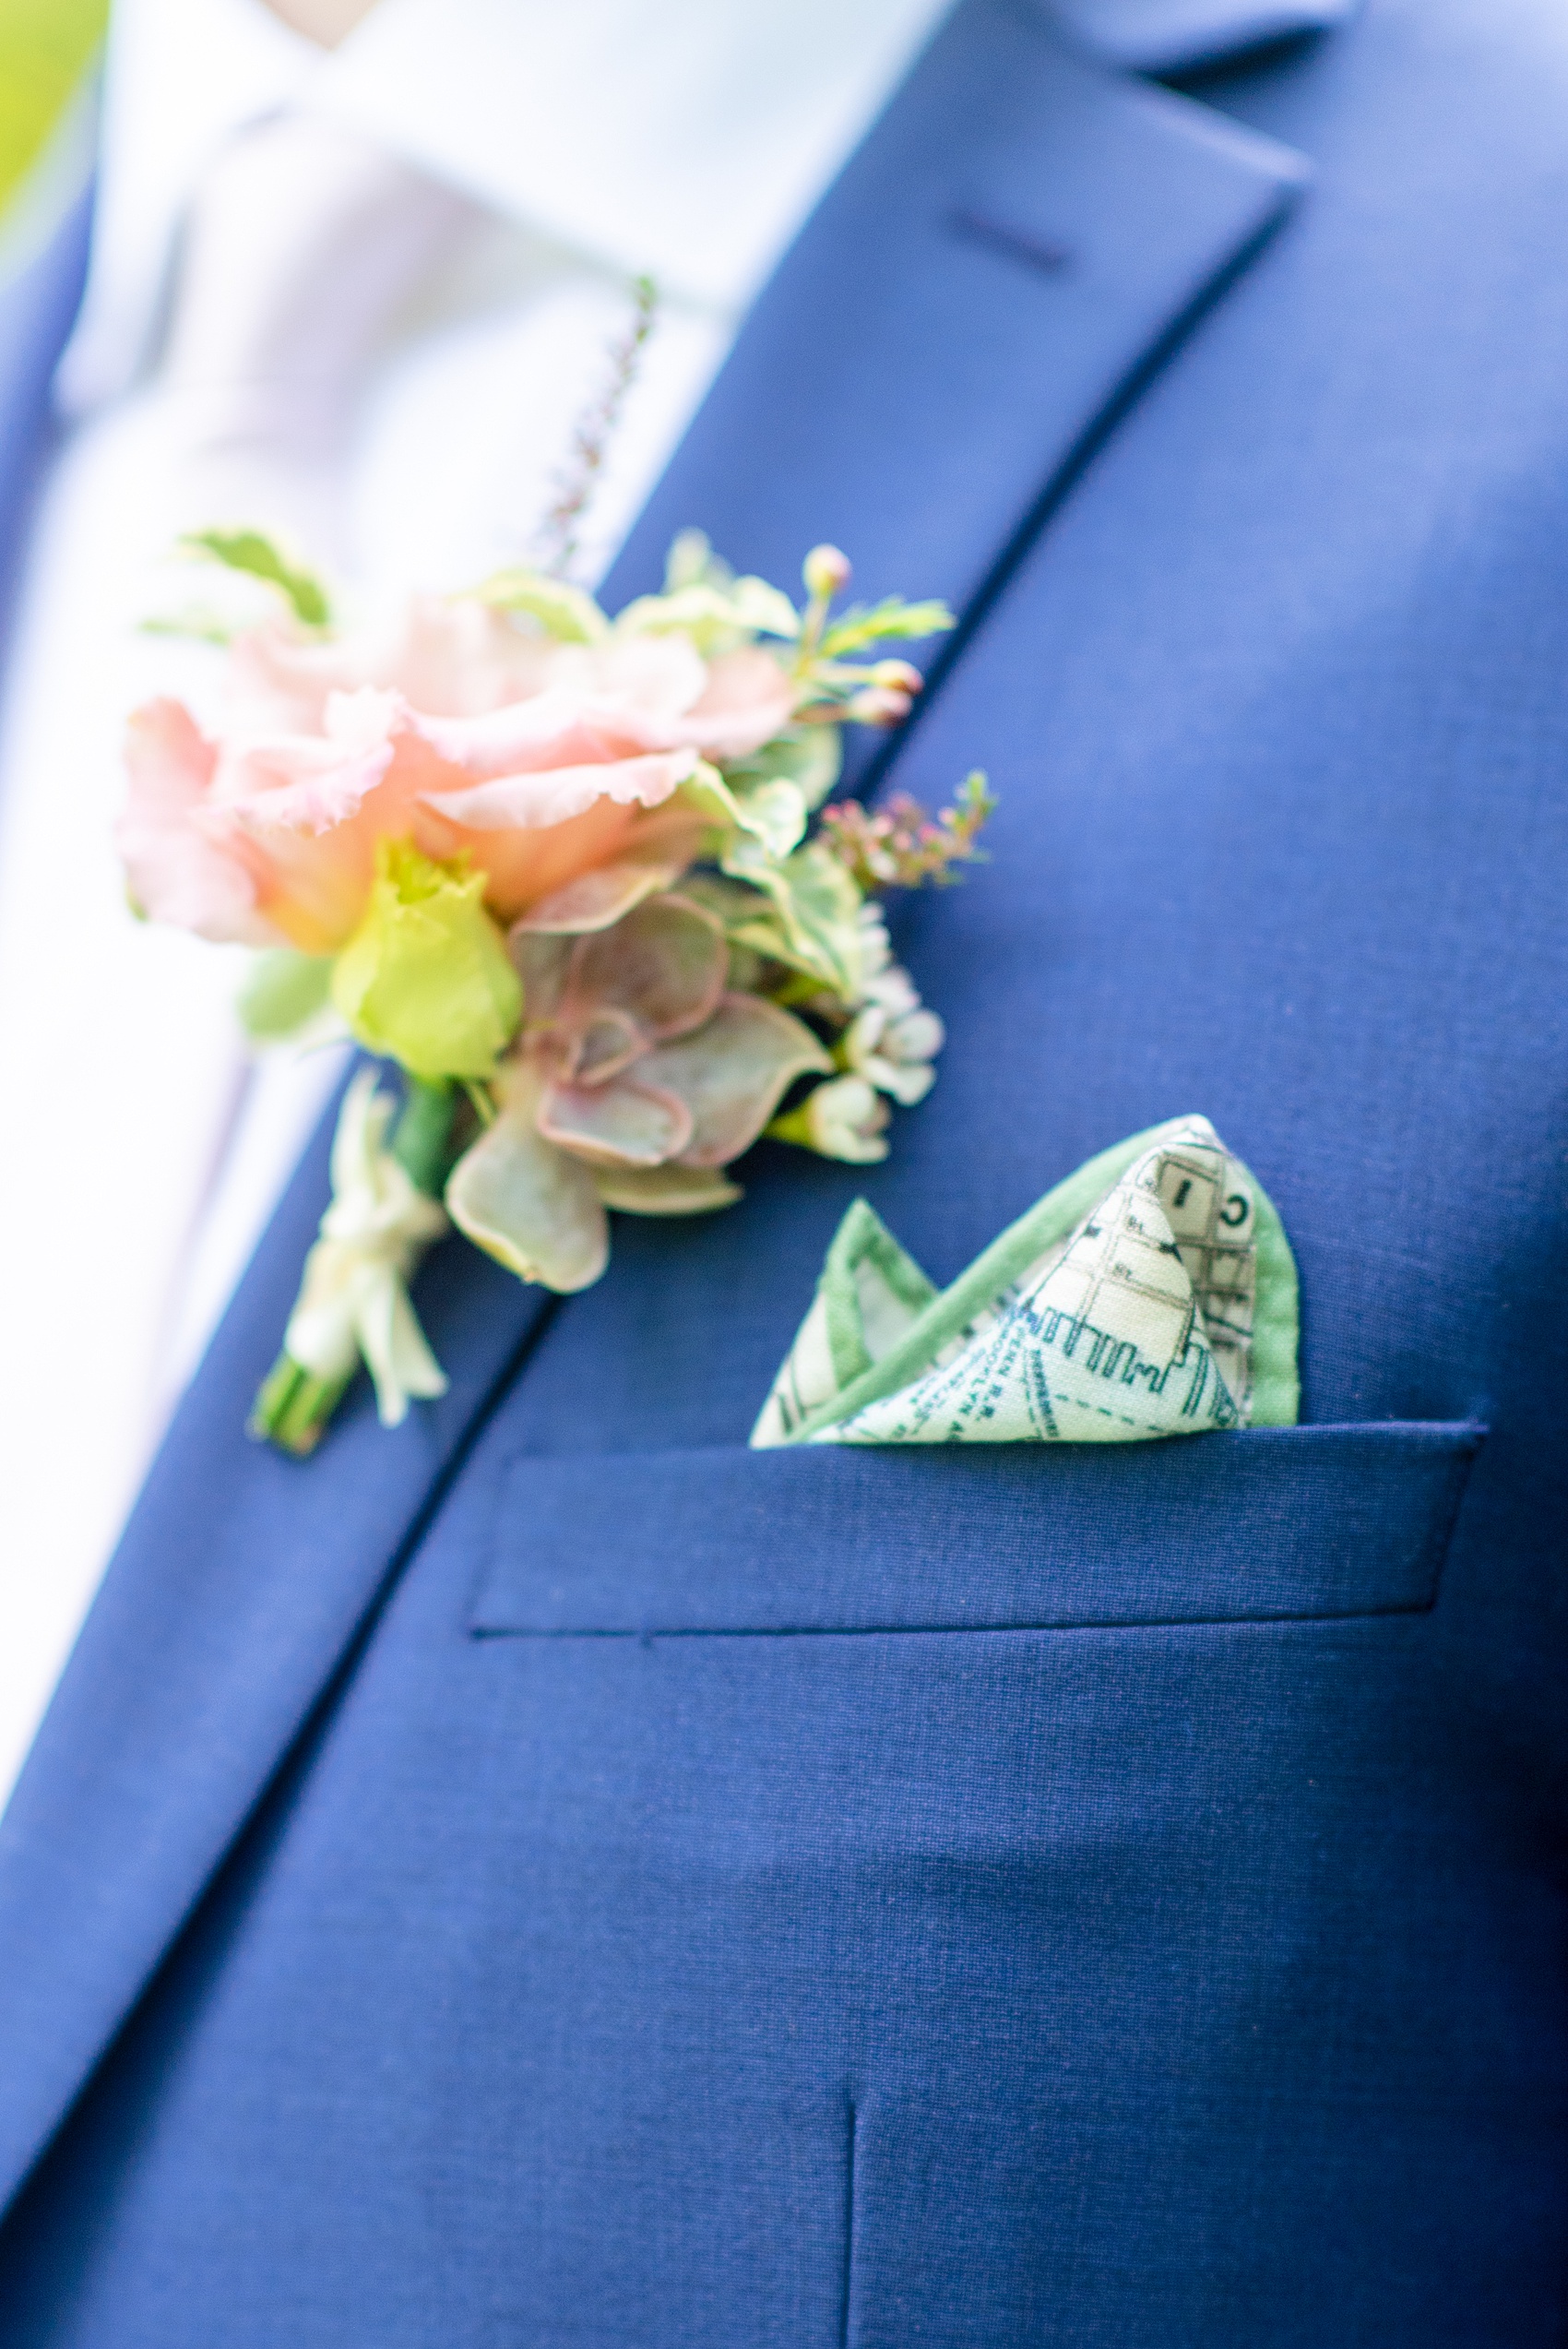 A summer wedding at Olde Mill Inn, NJ. Photos by Mikkel Paige Photography for an event with light pink and blue details. The groom wore a blue suit for his New Jersey venue event. A NYC pattern pocket square, highlighting Jersey City where the bride and groom live, finished the look with a white satin tie. Click through for their complete wedding recap! #OldeMillInn #NJwedding #NJweddingphotographer #mikkelpaige #NewJerseyWeddingVenue #NewJerseyWedding #CrossEstateGardens #groom #groomsuits #bluesuit #groomdetails